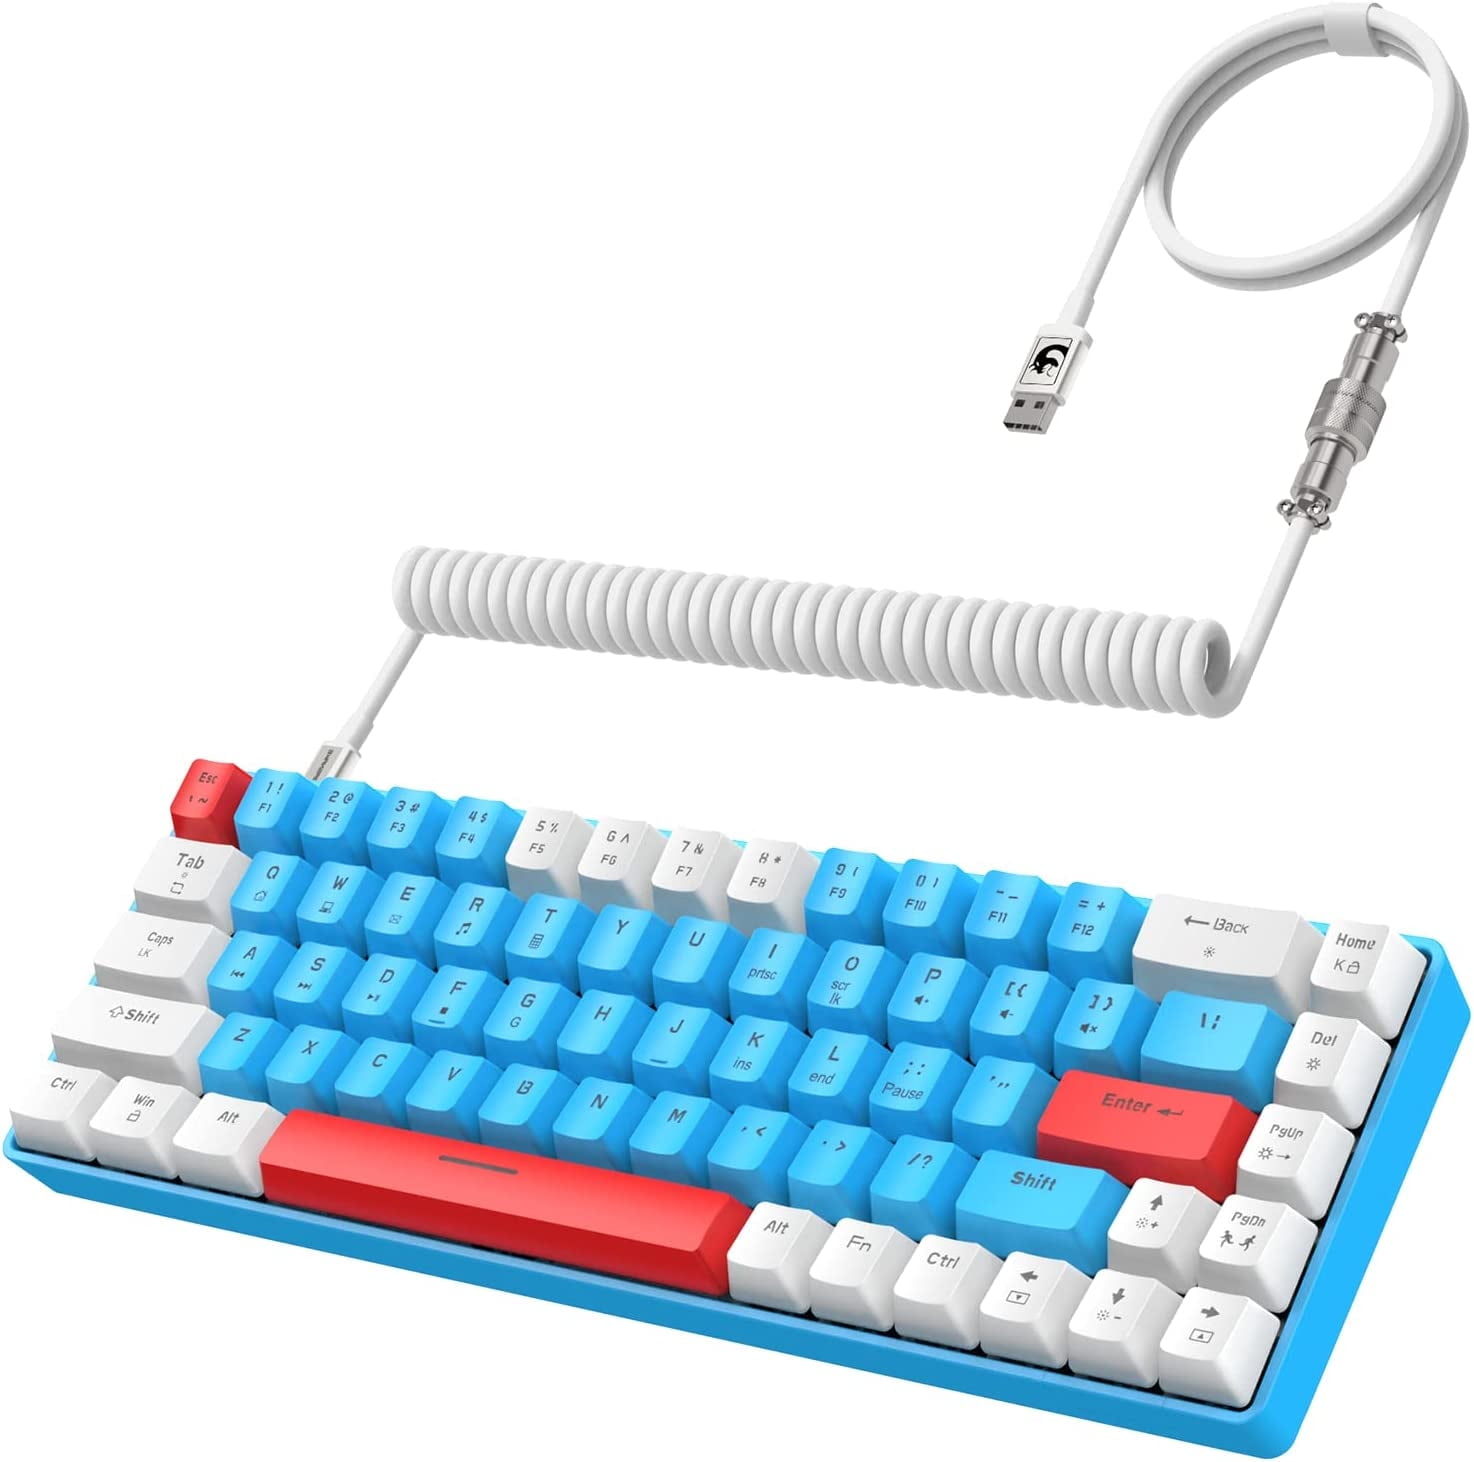 ZIYOULANG T8 60% Gaming Keyboard, 68 Keys Compact Mini Wired Mechanical  Keyboard with 18 Chroma RGB Backlit, Blue Switch, USB C Coiled Keyboard  Cable for PC Laptop Mac PS4 XBOX -Blue White 